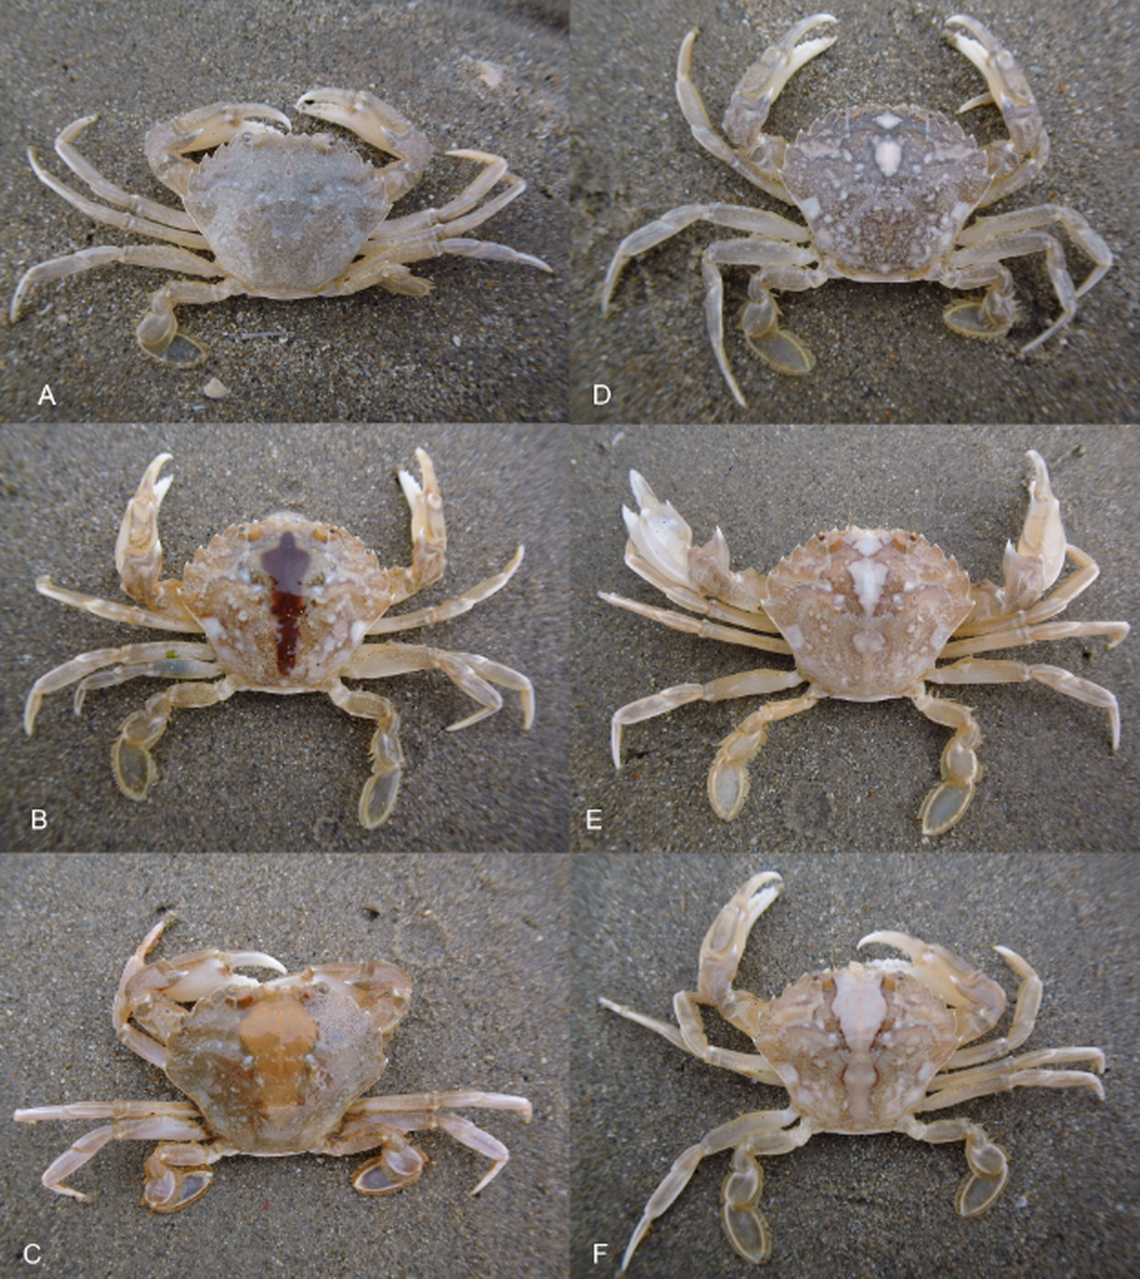 The crabs in Belgium had a variety of colors and markings, but all belong to the same new species.